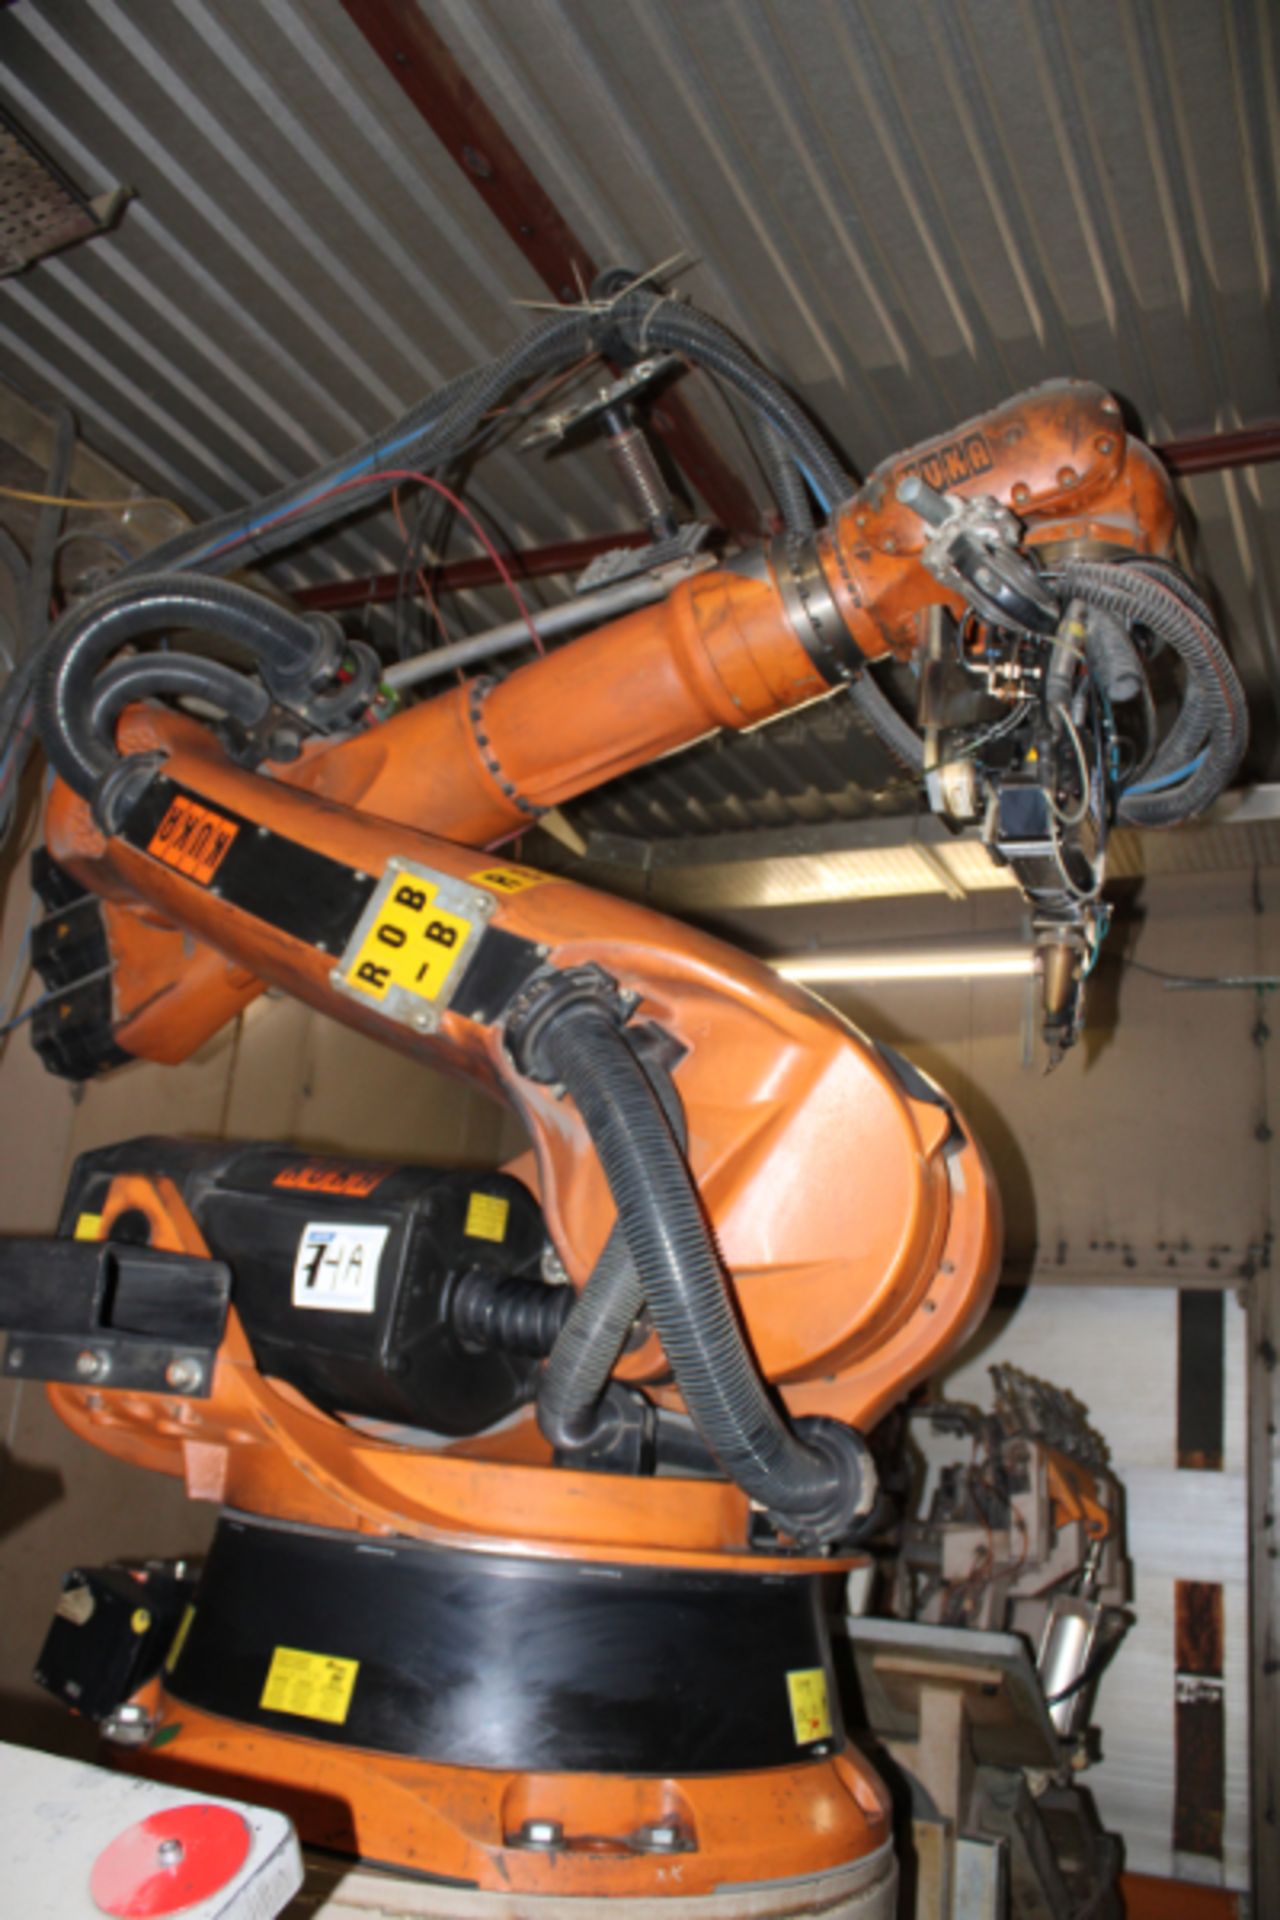 Kuka KR-210 Robot, Maximum Reach: 2,700 mm, Rated Payload: 210 Kg, with Robot Controller, New 2003 - Image 4 of 6